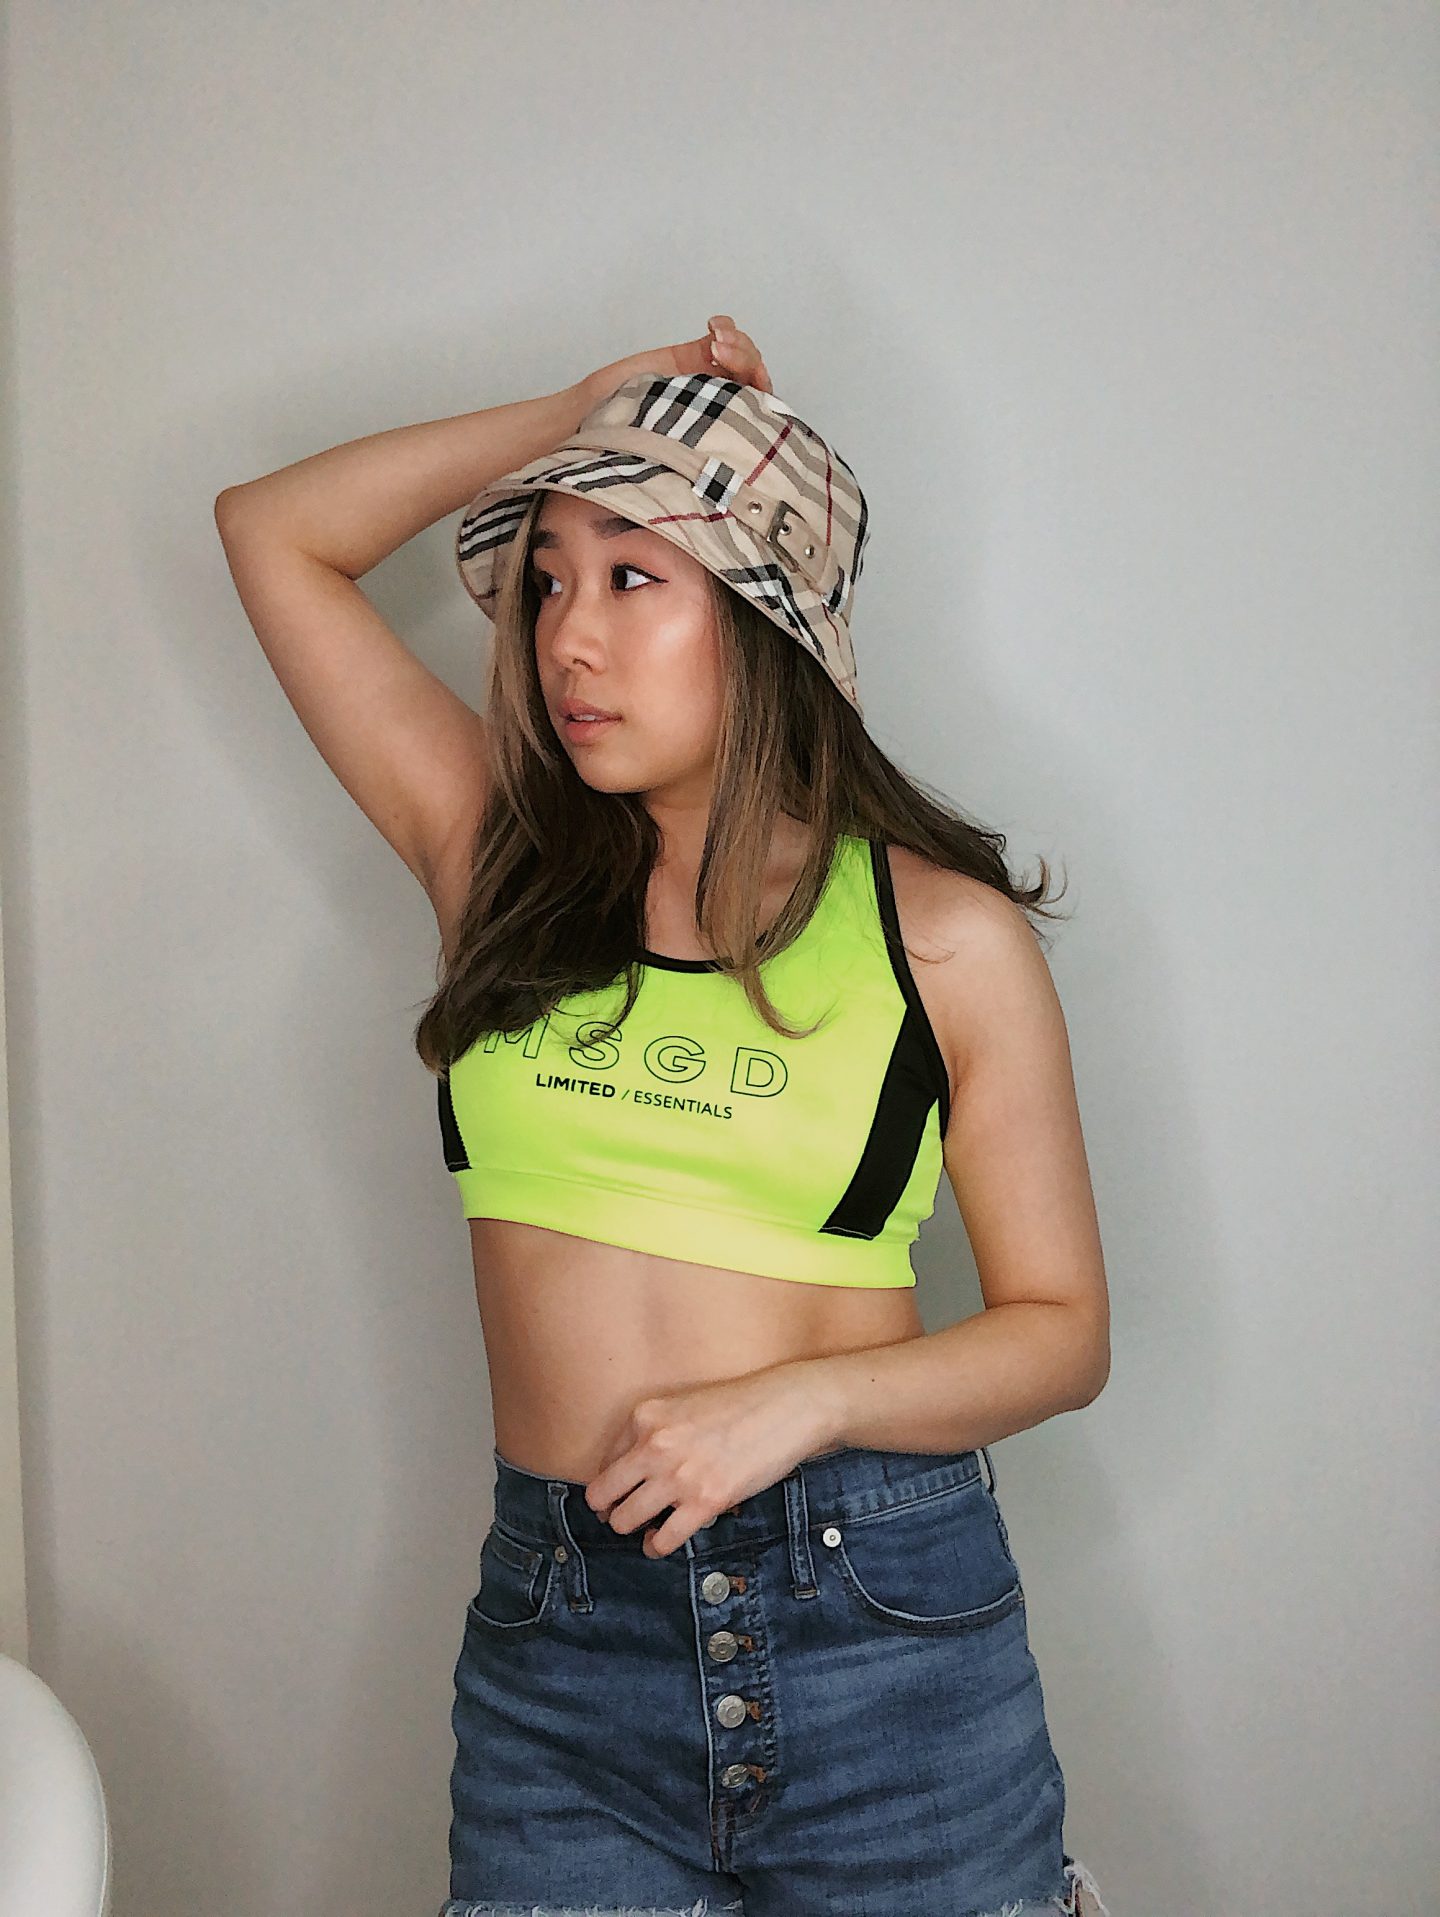 plaid bucket hat paired with jean shorts and a neon top